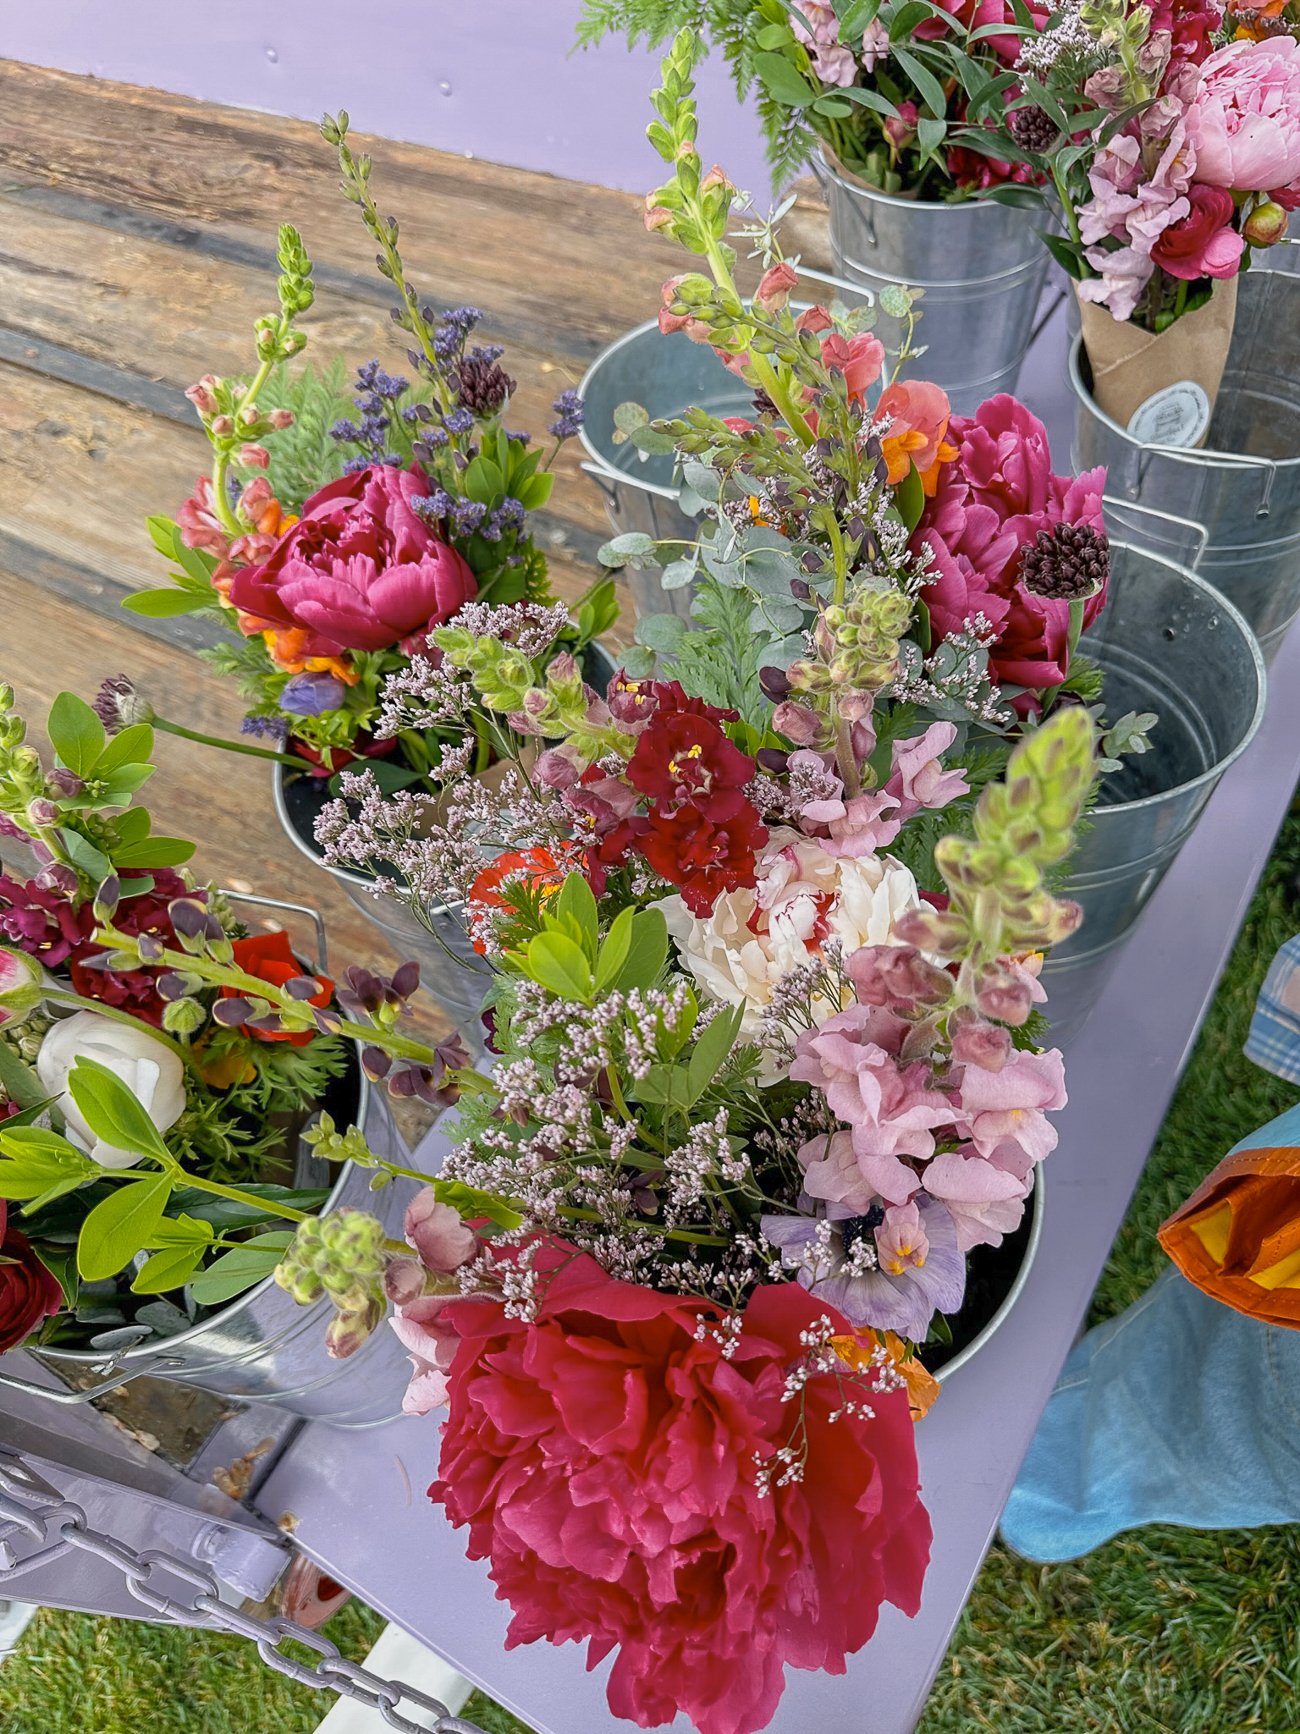 Bouquets of Peonies and snapdragons in metal buckets at the Boothbay Harbor farmer's market